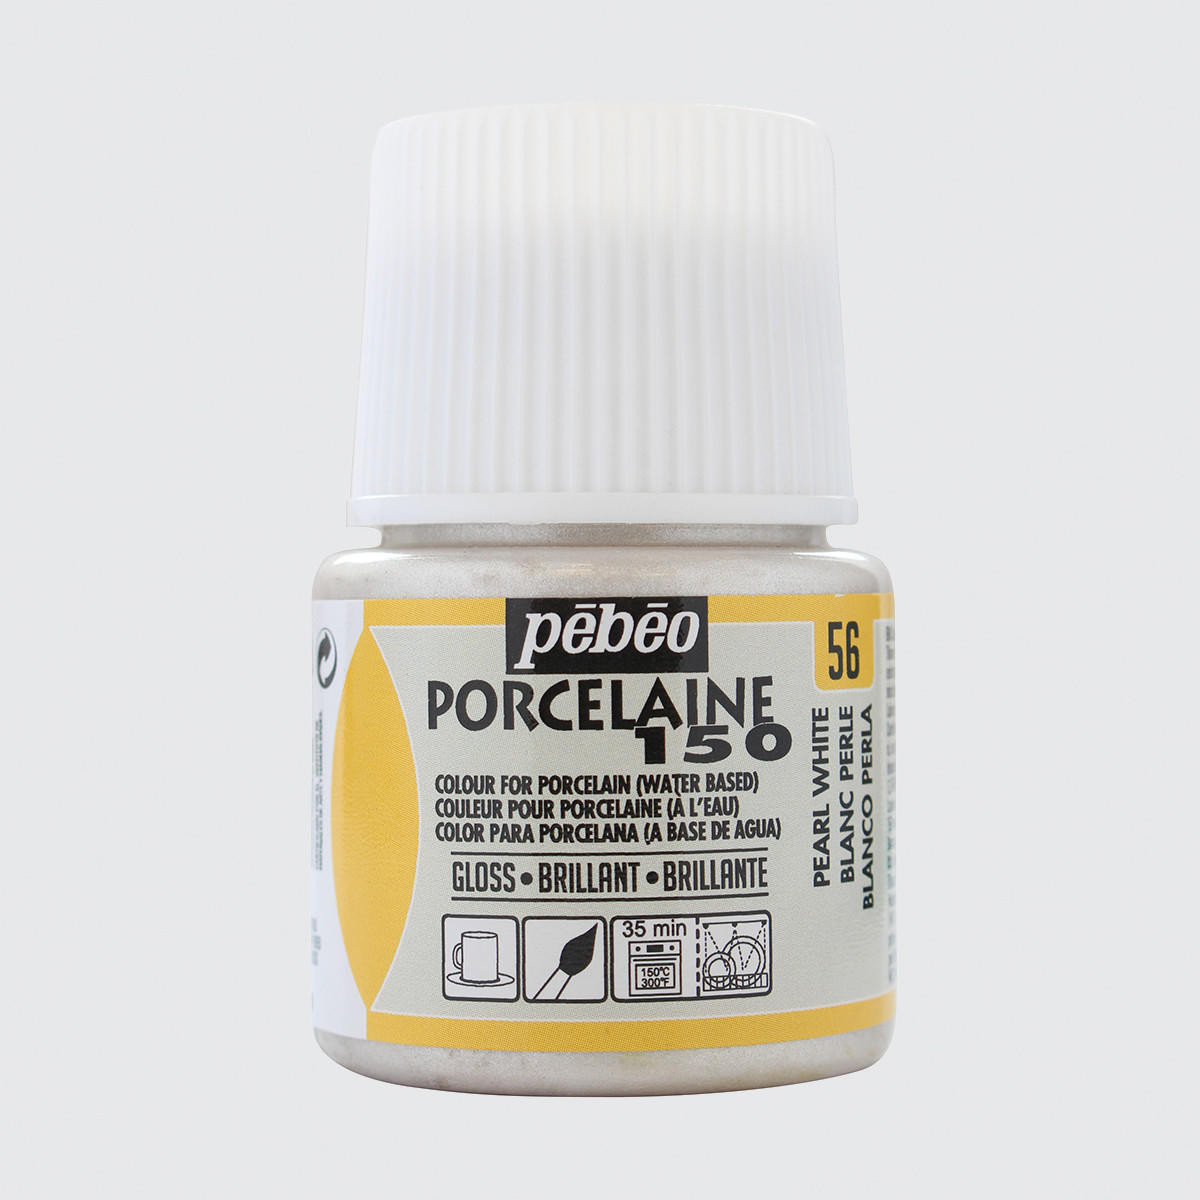 Pebeo Porcelaine 150 Paint 45ml Pearl White